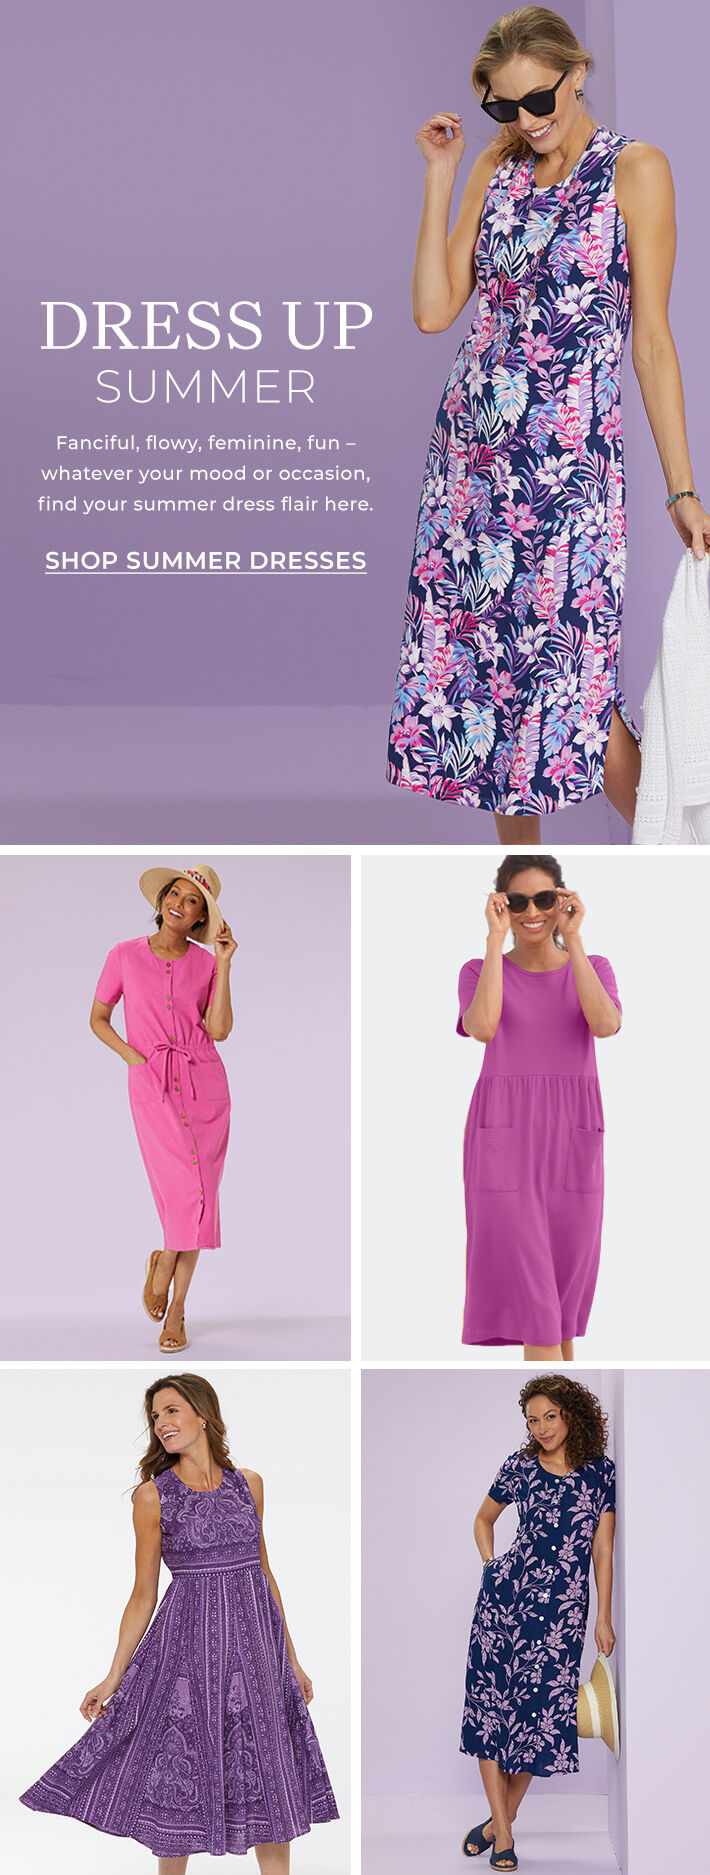 dress up summer fanciful, flowy, feminine, fun - whatever your mood or occasion, find your summer dress flair here. shop summer dresses